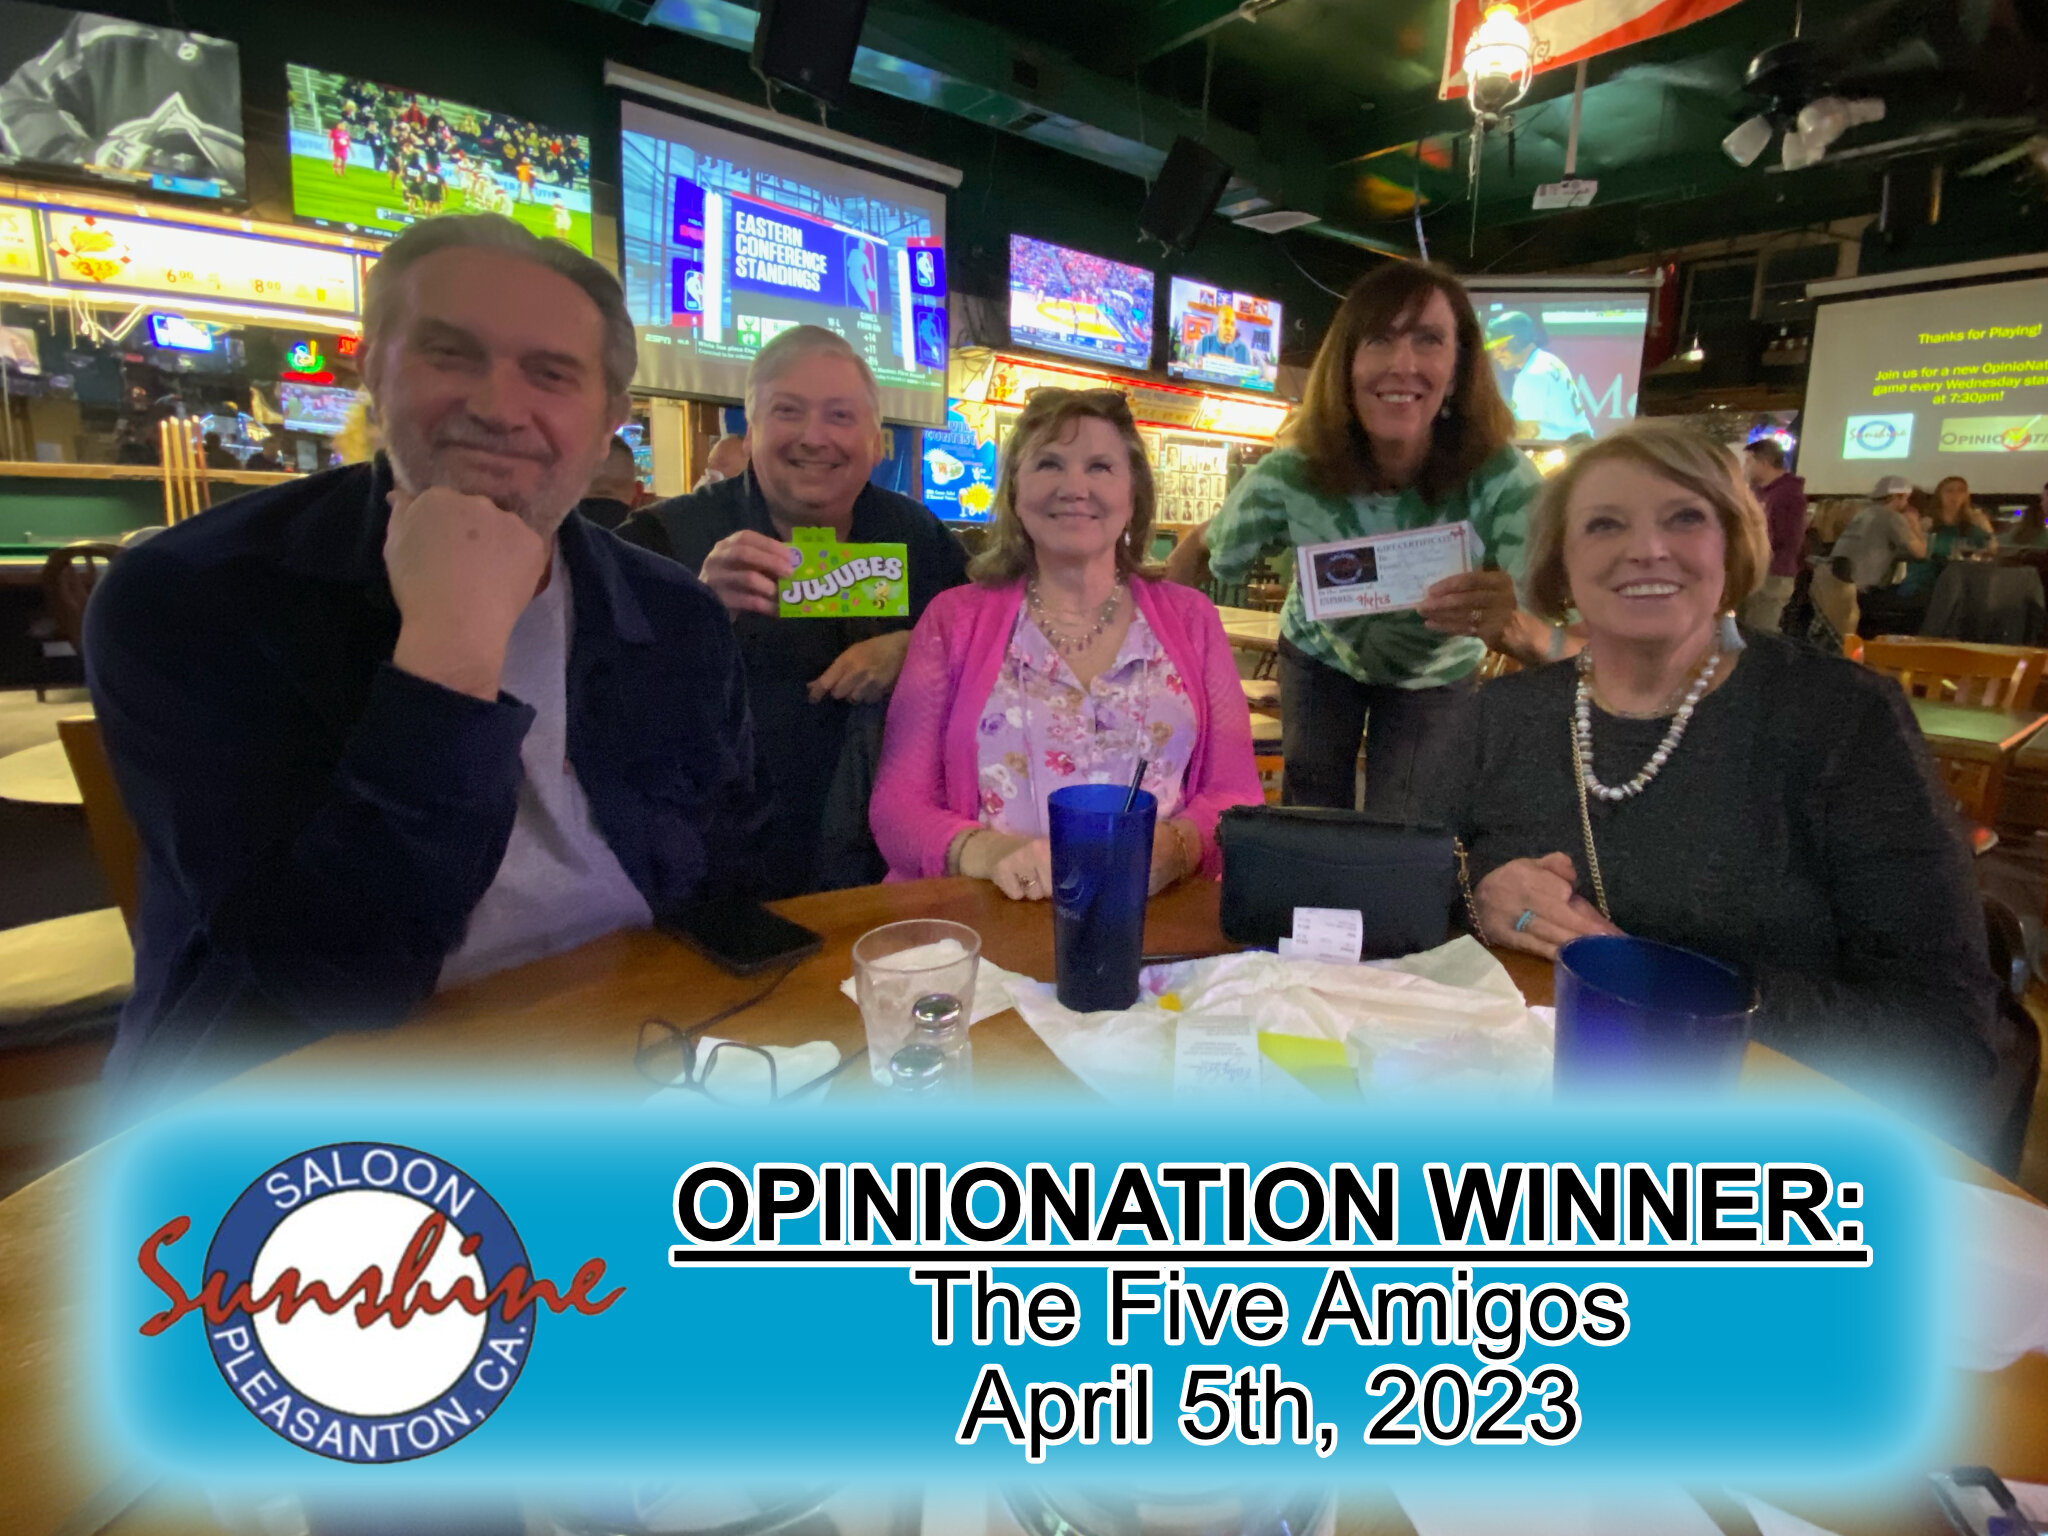 Congratulations to our Opinionation trivia winners, &quot;Blood, Sweat, and Beers&quot;! Sponsored by Jujubes? 🤔

Join us Wednesday evenings for your shot to win opinionation trivia at #Sunshinesaloon!